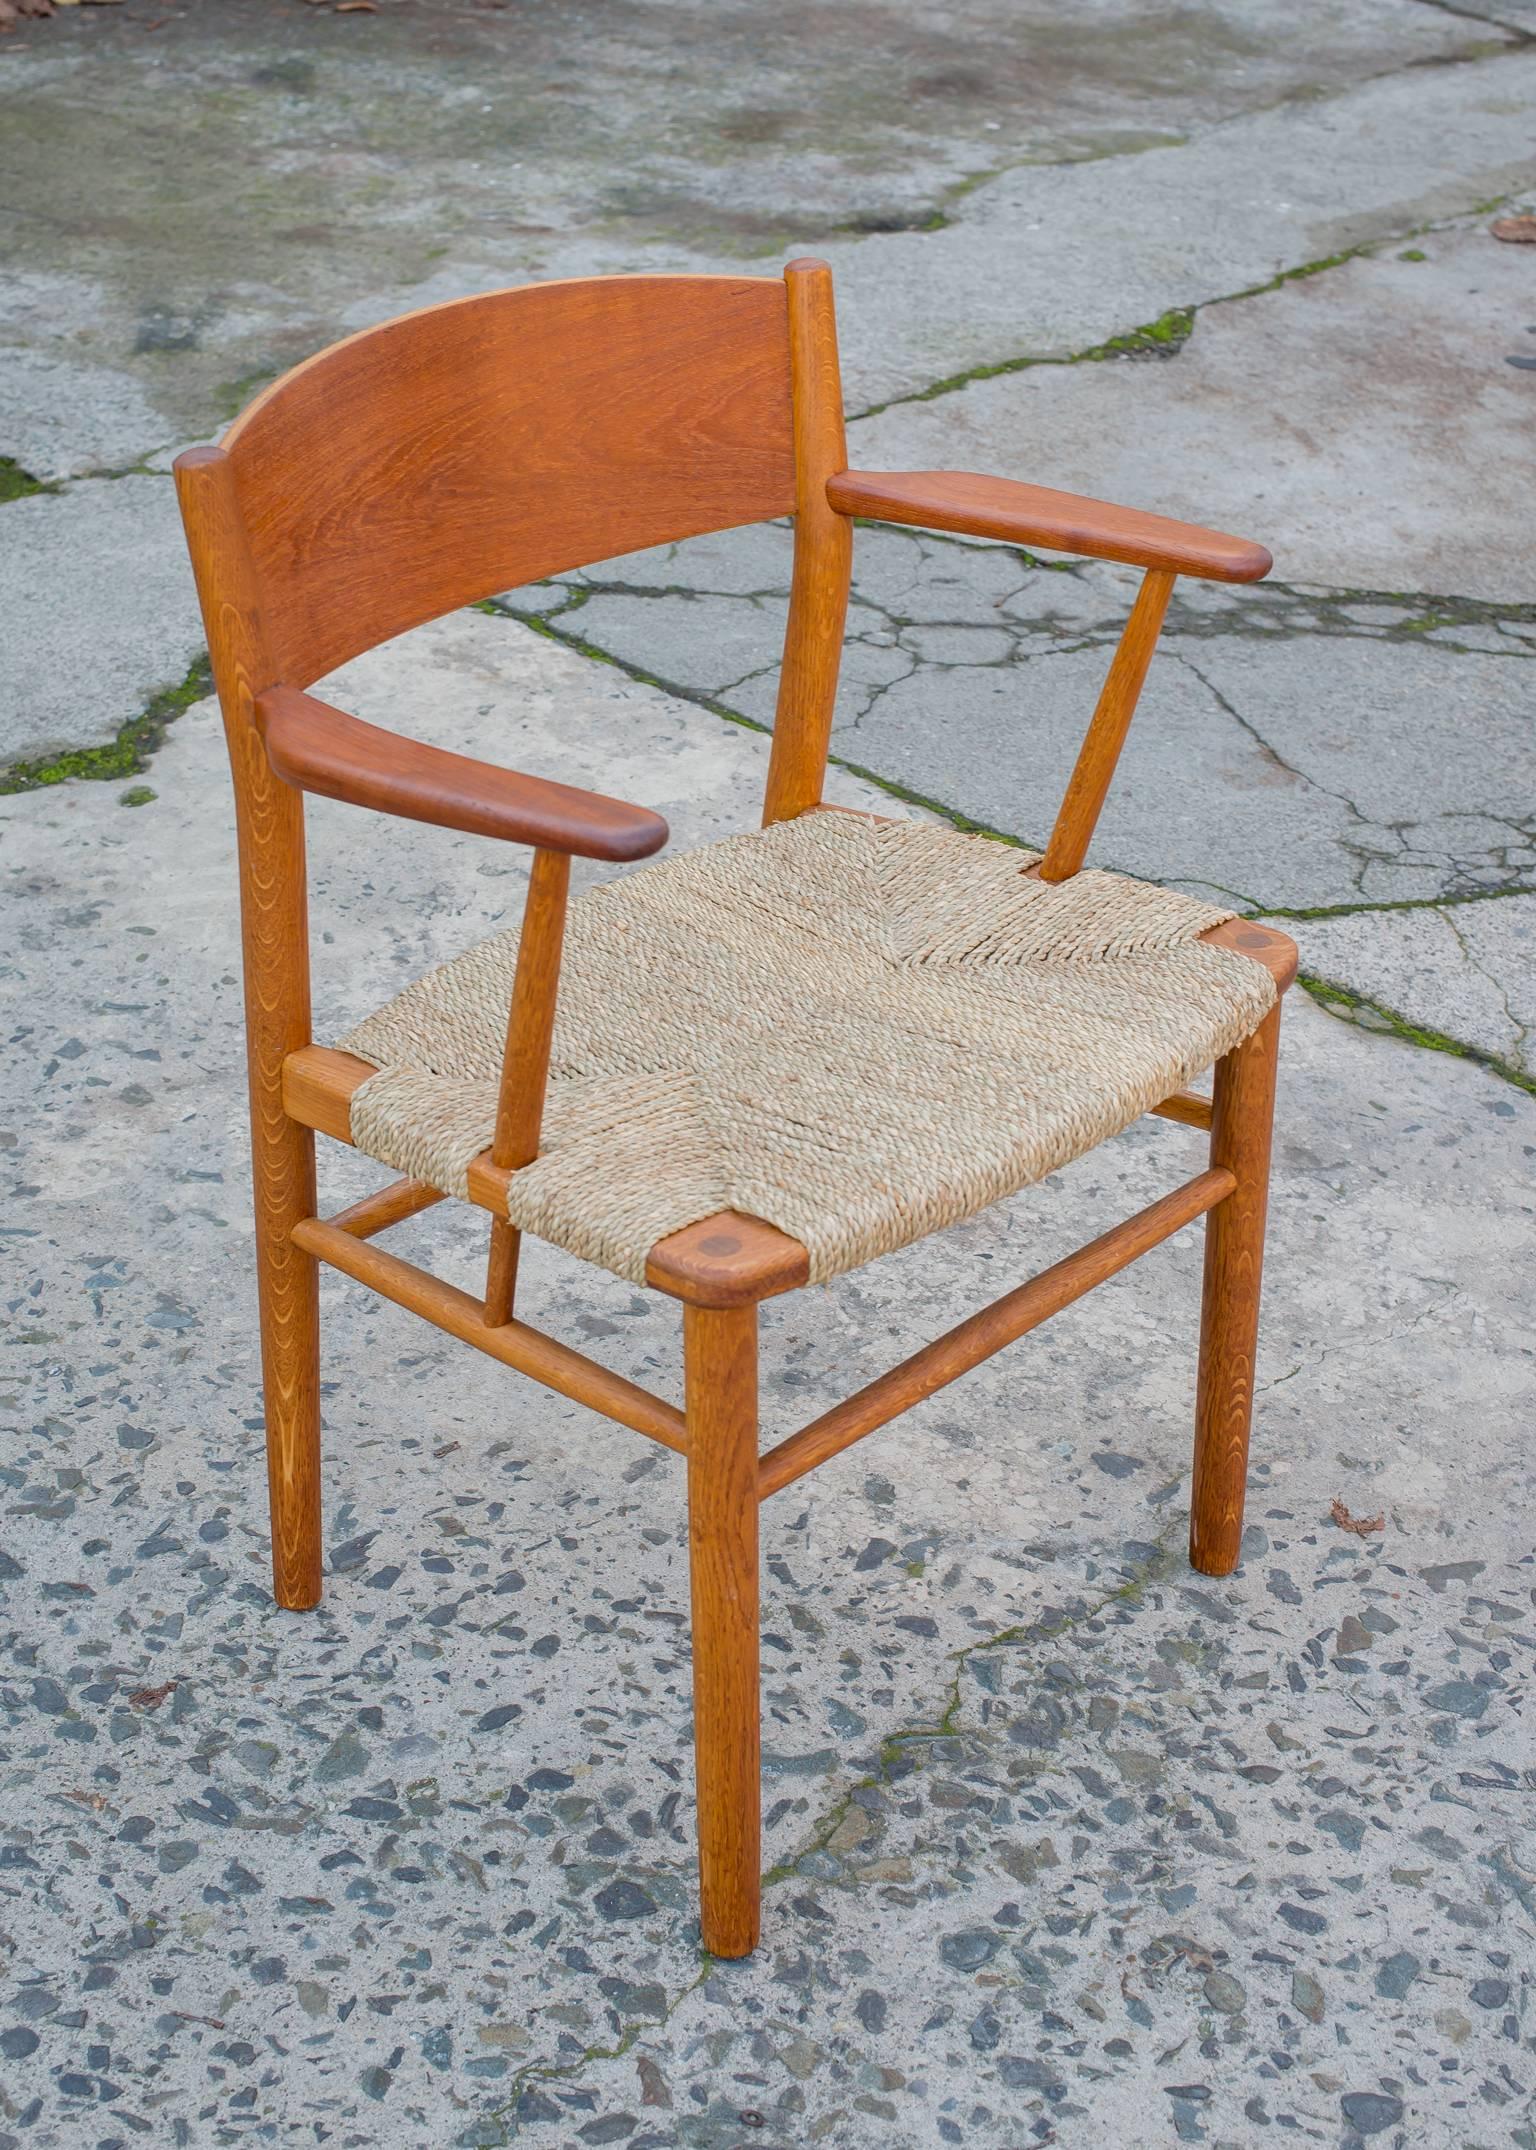 Vintage Borge Mogensen Armchair.
Fully restored armchair by Borge Mogensen (1914-1972), Denmark.
New grass seat on solid teak or oak frame newly stripped, re-oiled and buffed to a soft luster.
All joinery is solid.
Very sturdy design with